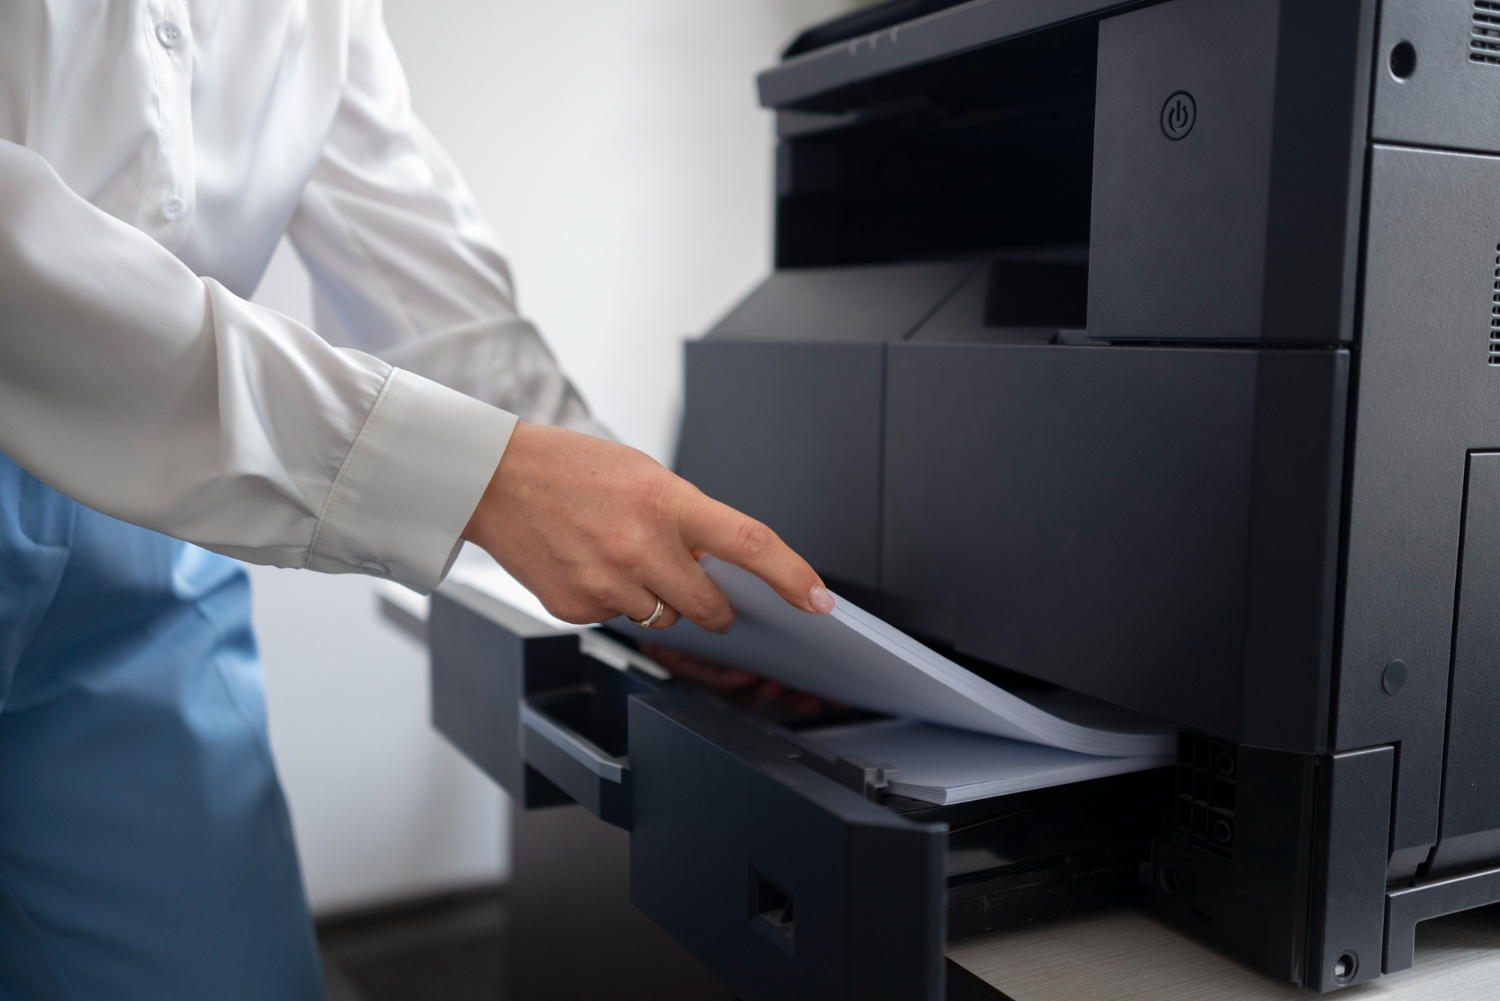 Modern scanner and photocopier in a business setting.